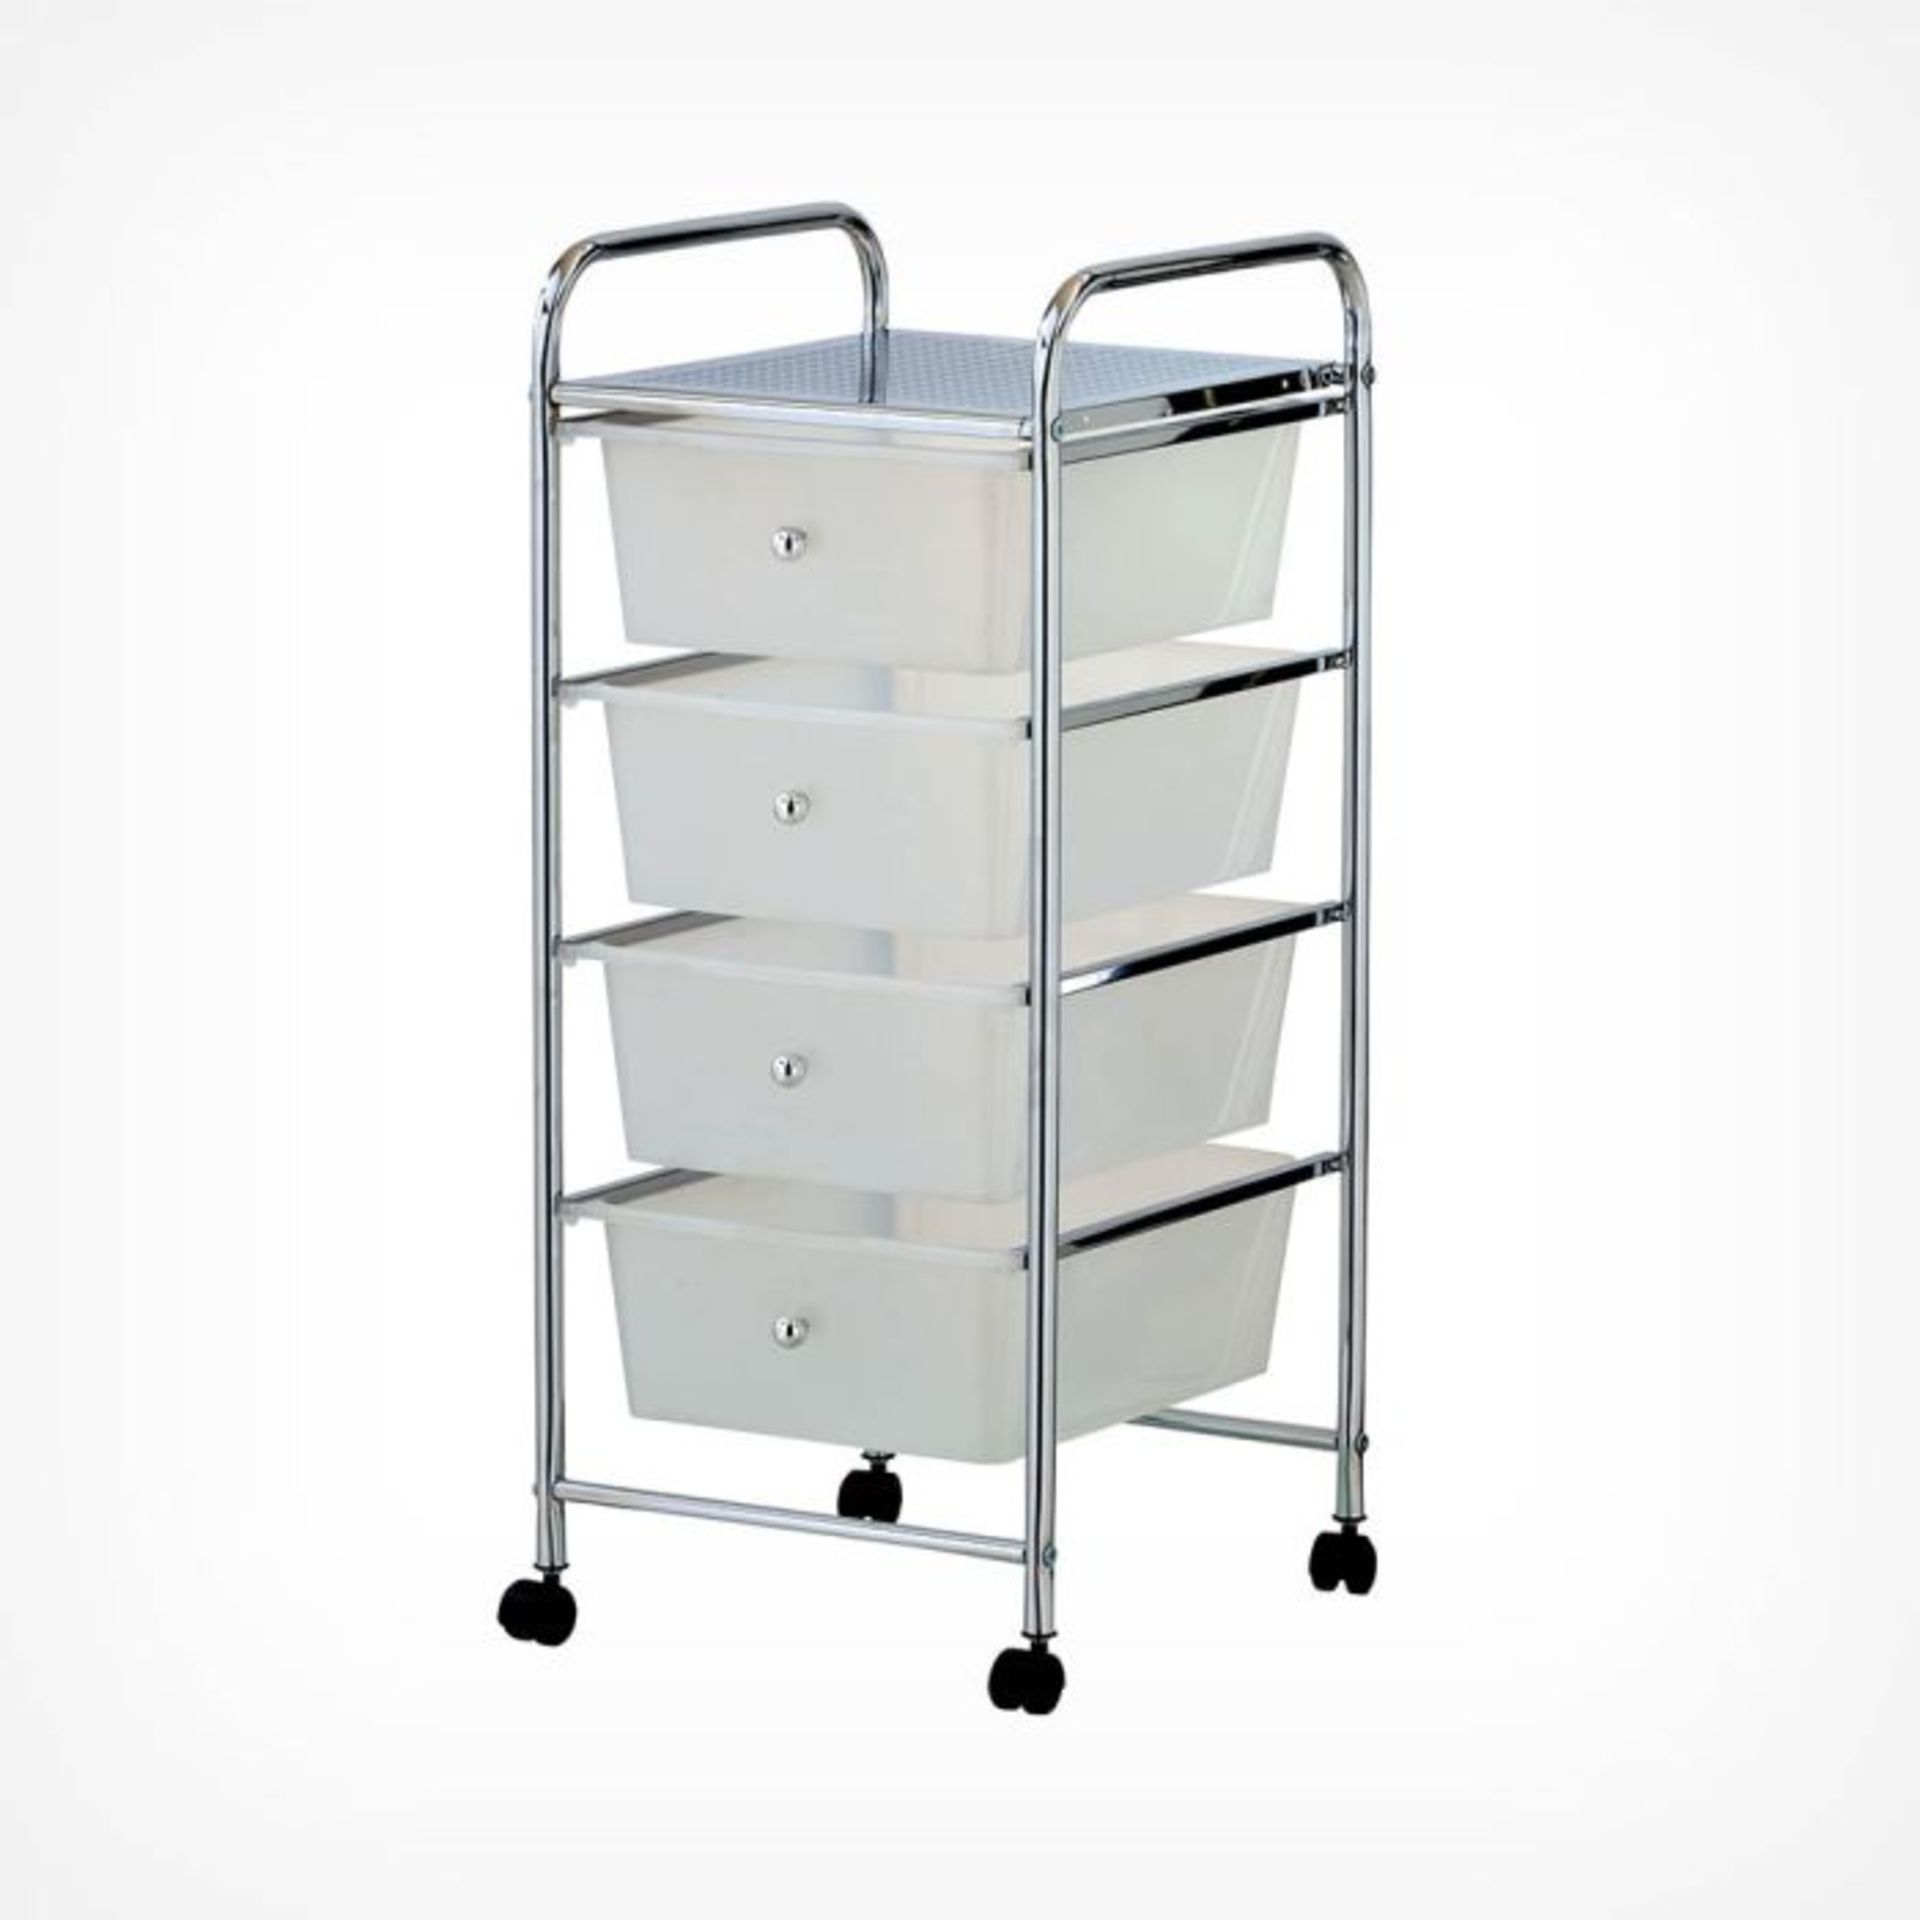 4 Drawer Trolley - White. Organise your office or hair and beauty supplies in this mobile storage